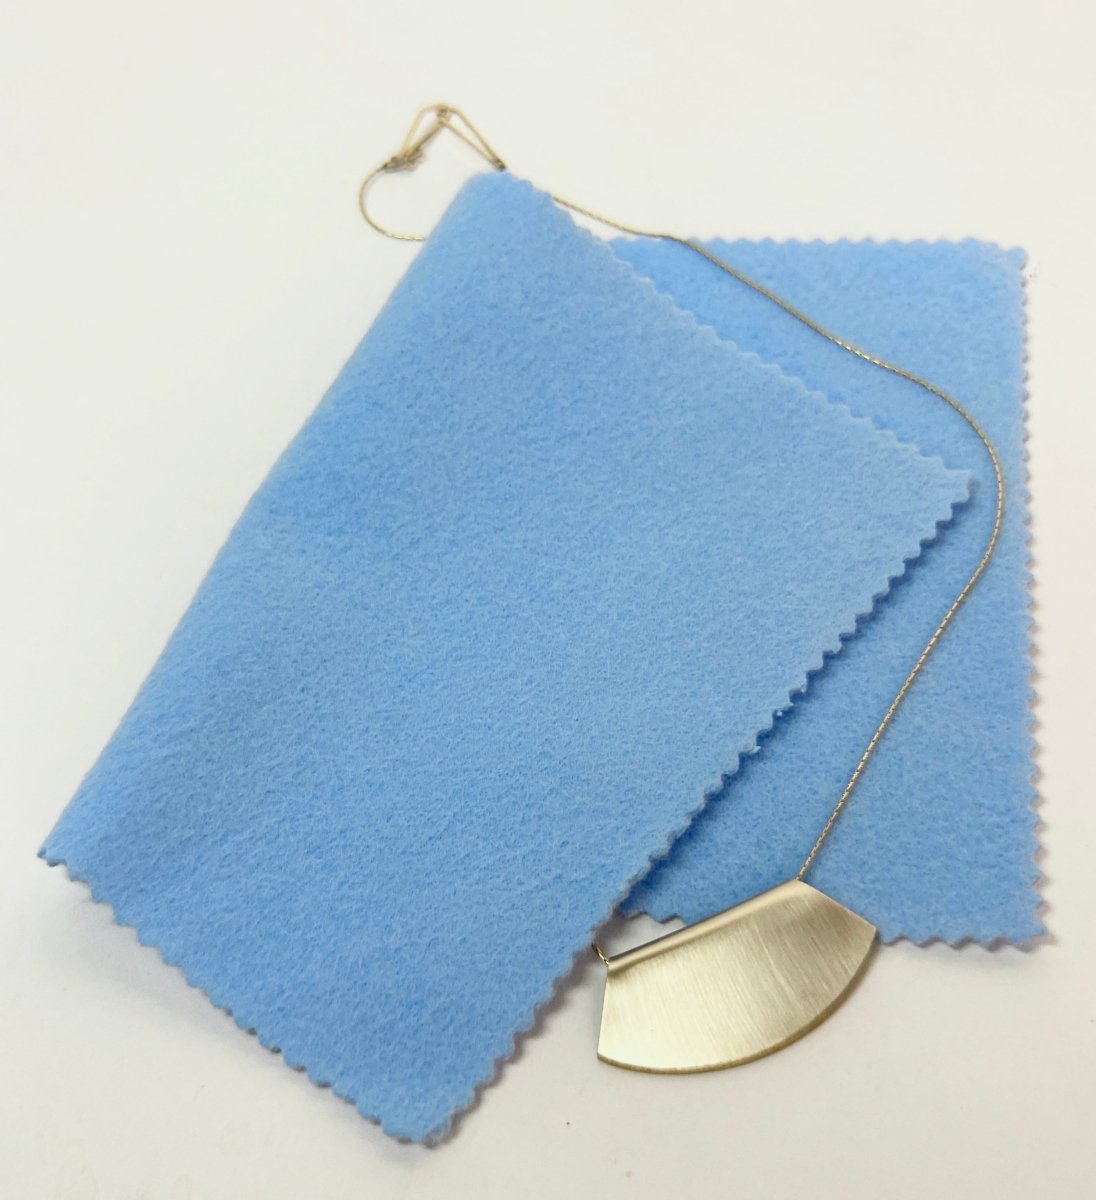  Sunshine polishing cloth to keep copper, brass, silver  beautiful bright and tarnish free! : Handmade Products